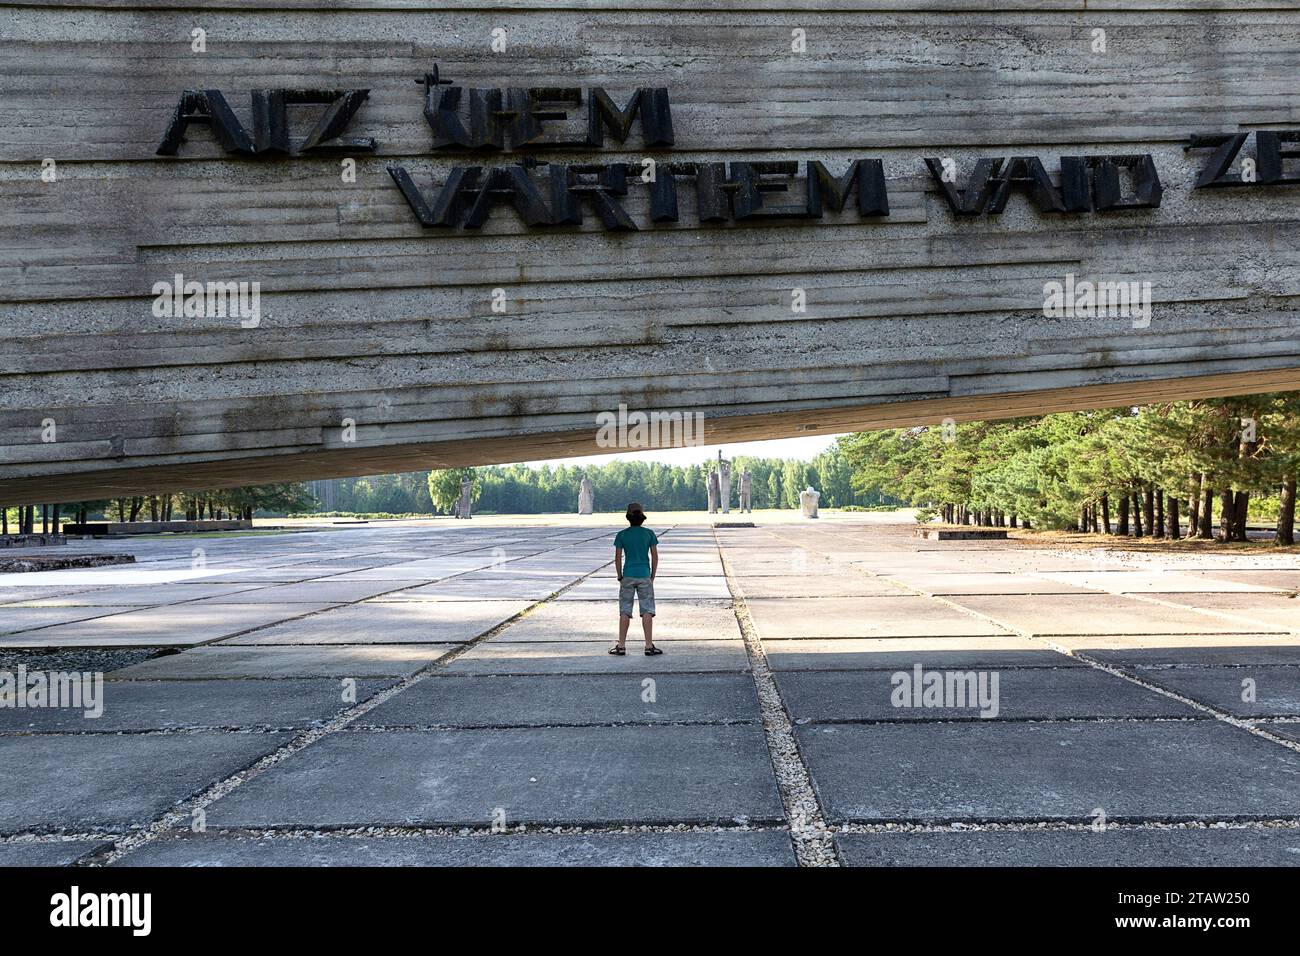 Tourist visiting Salaspils Memorial, one of Europe's largest monument complexes commemorating victims of Nazism, Latvia Stock Photo